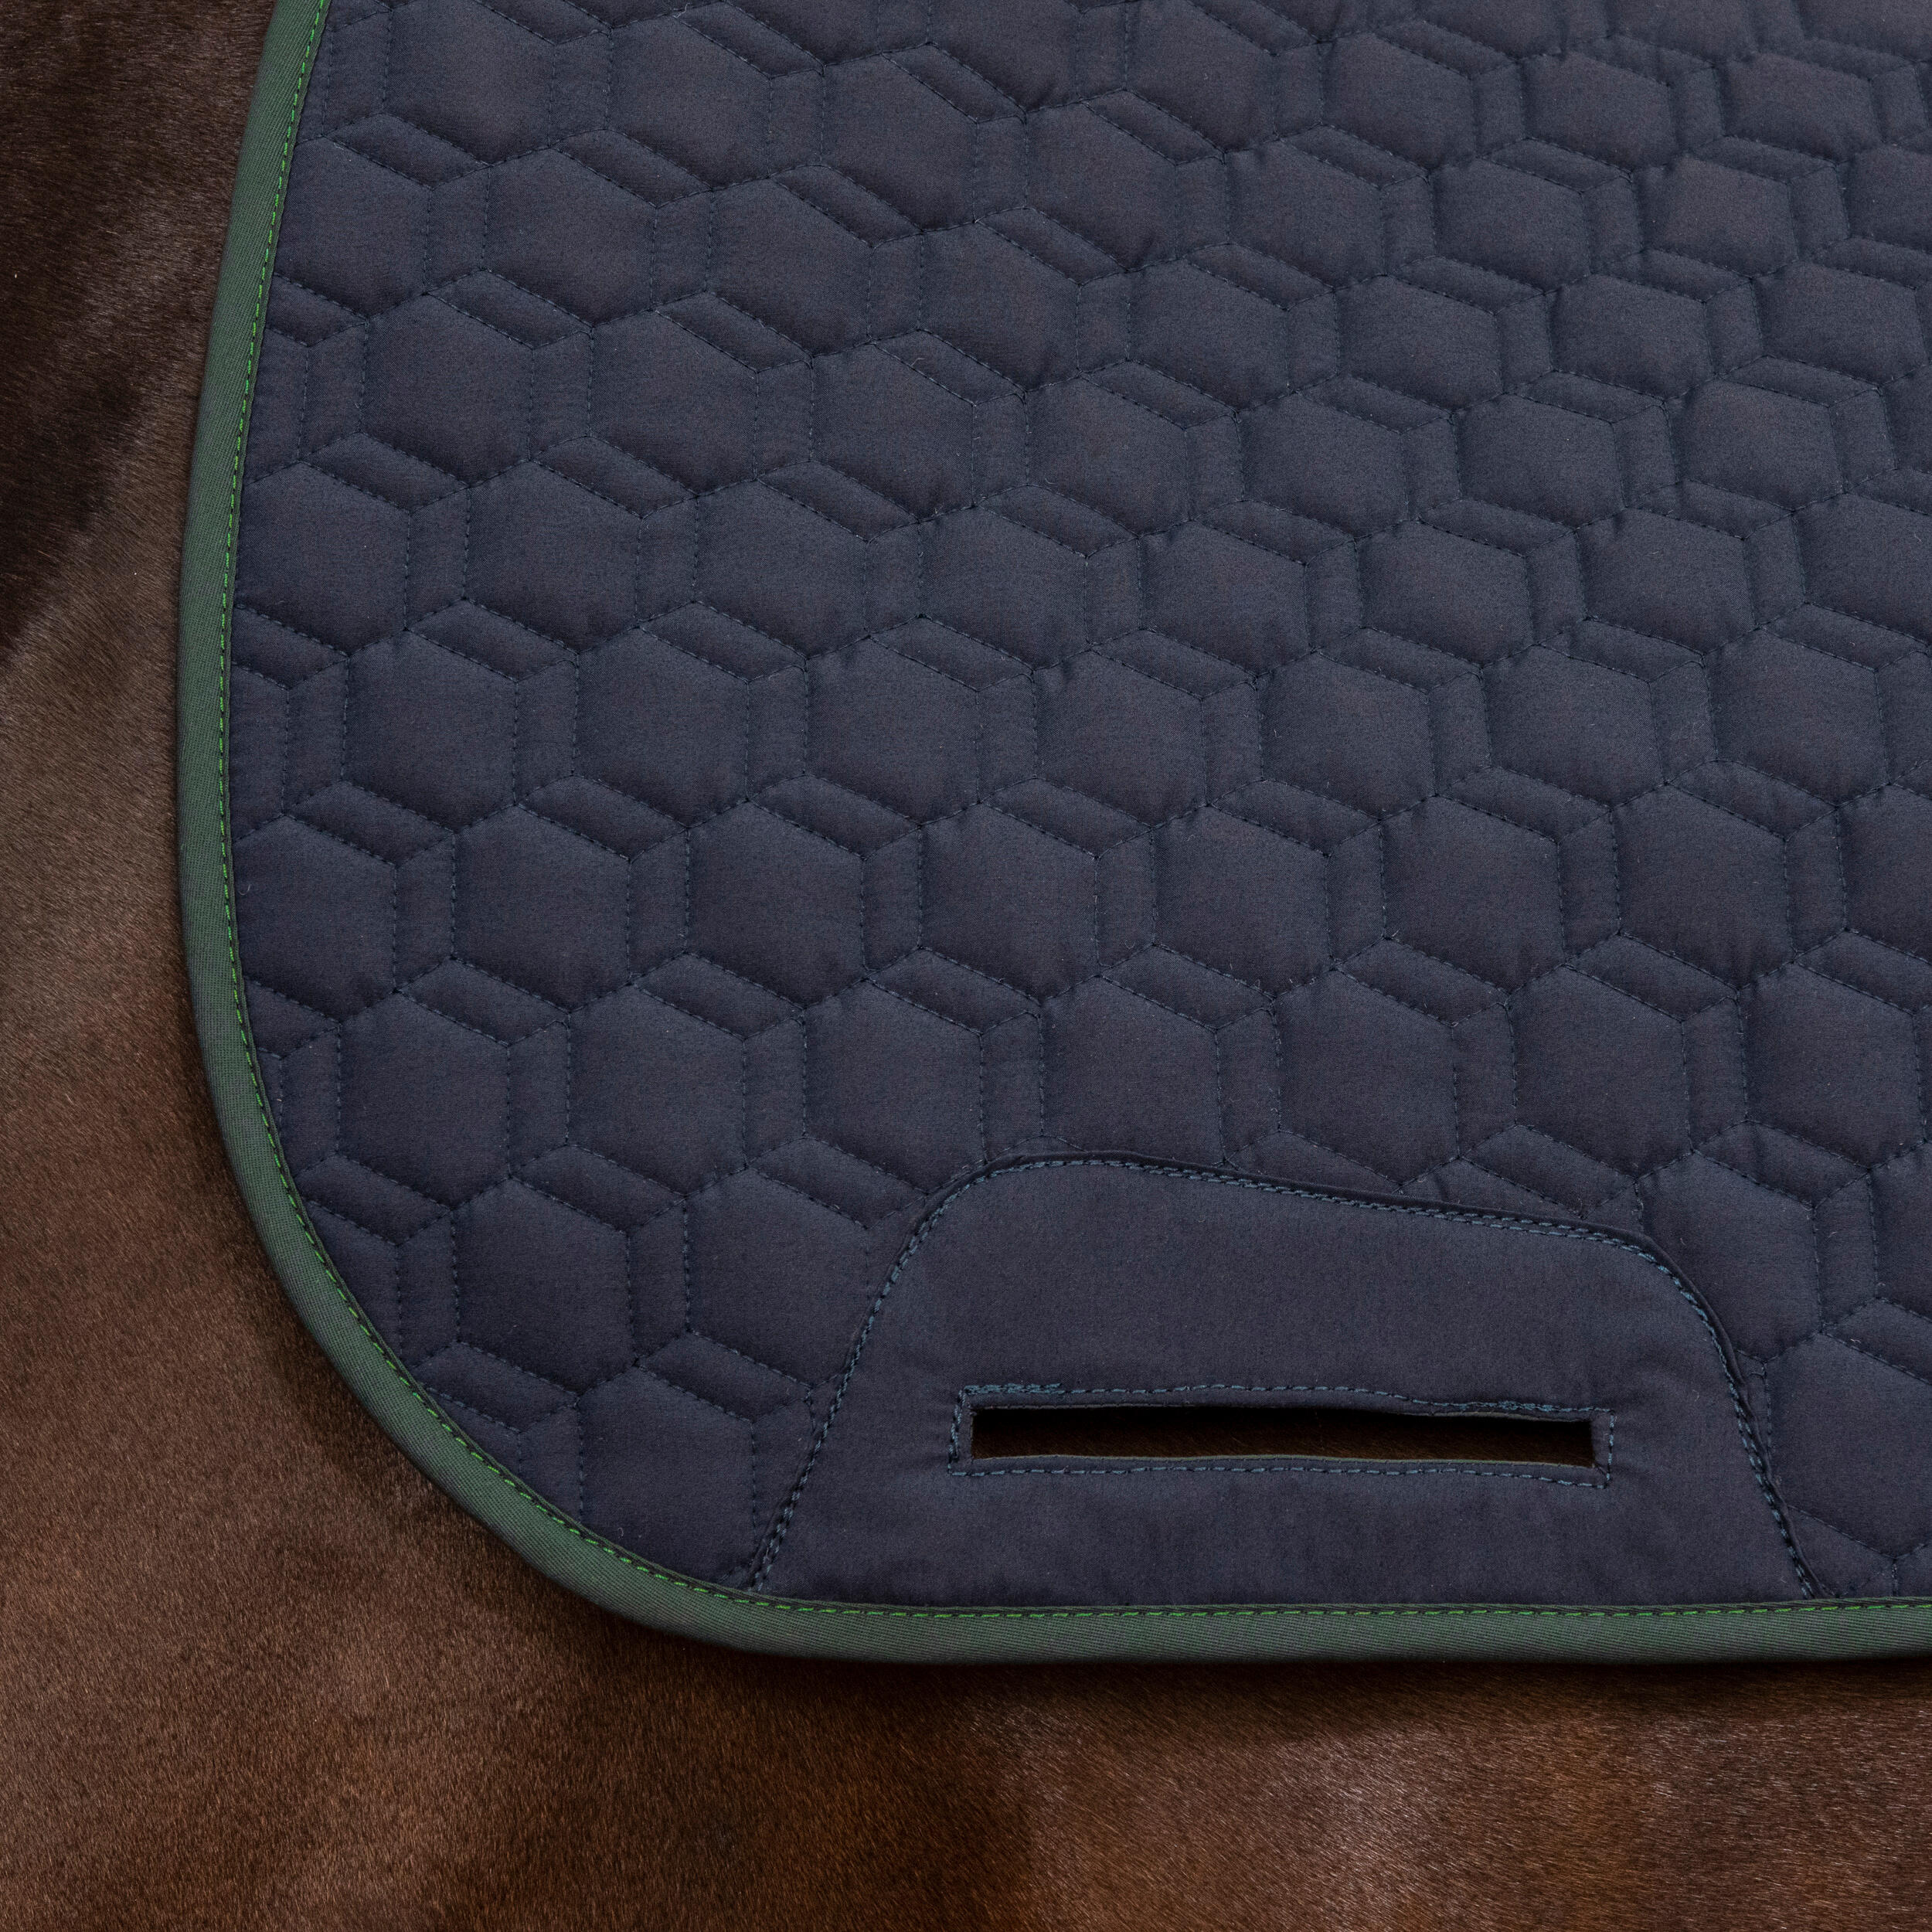 Horse Riding Reversible Saddle Cloth For Horse and Pony 500 - Navy/Green 8/9